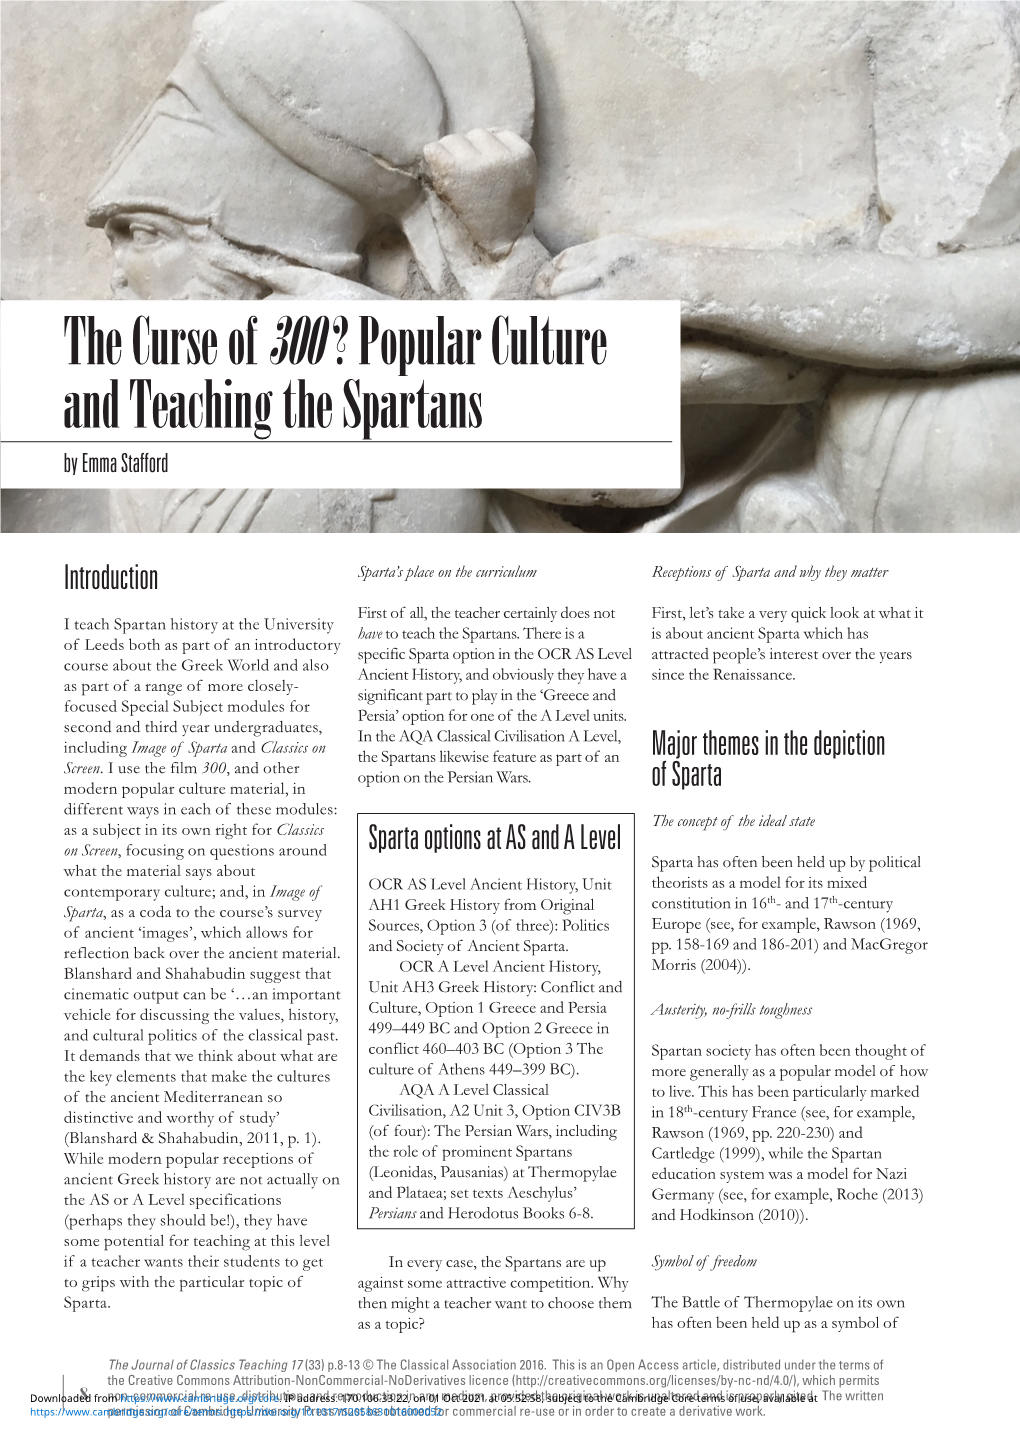 Popular Culture and Teaching the Spartans by Emma Stafford